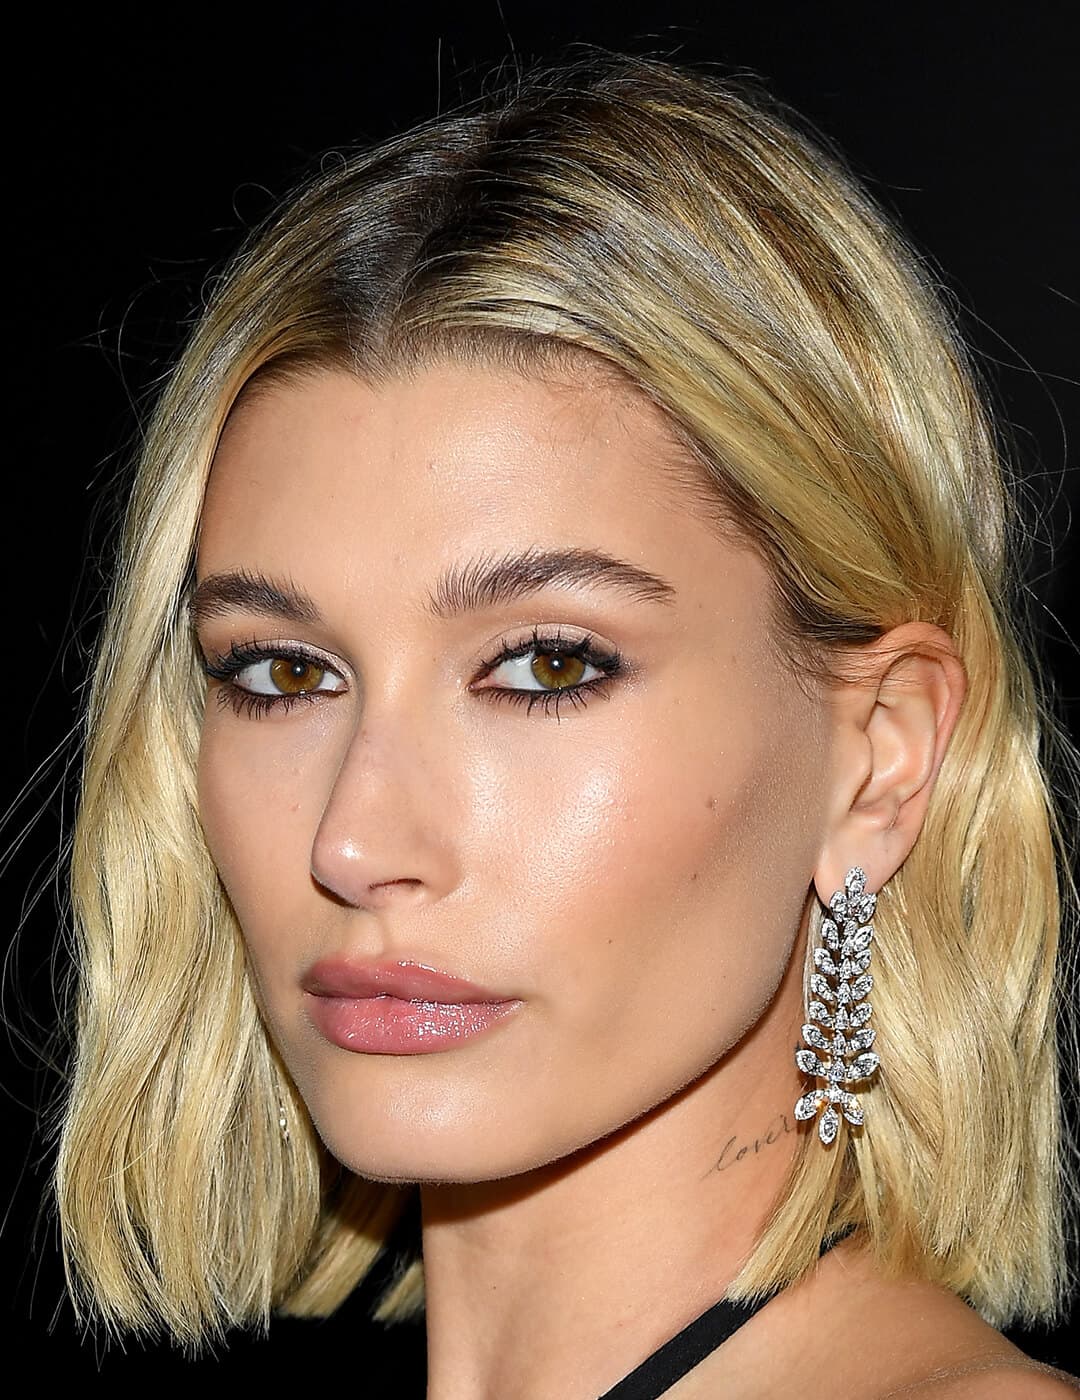 A photo of Hailey Bieber with her hair tucked in her ear showing her dazzling silver earring